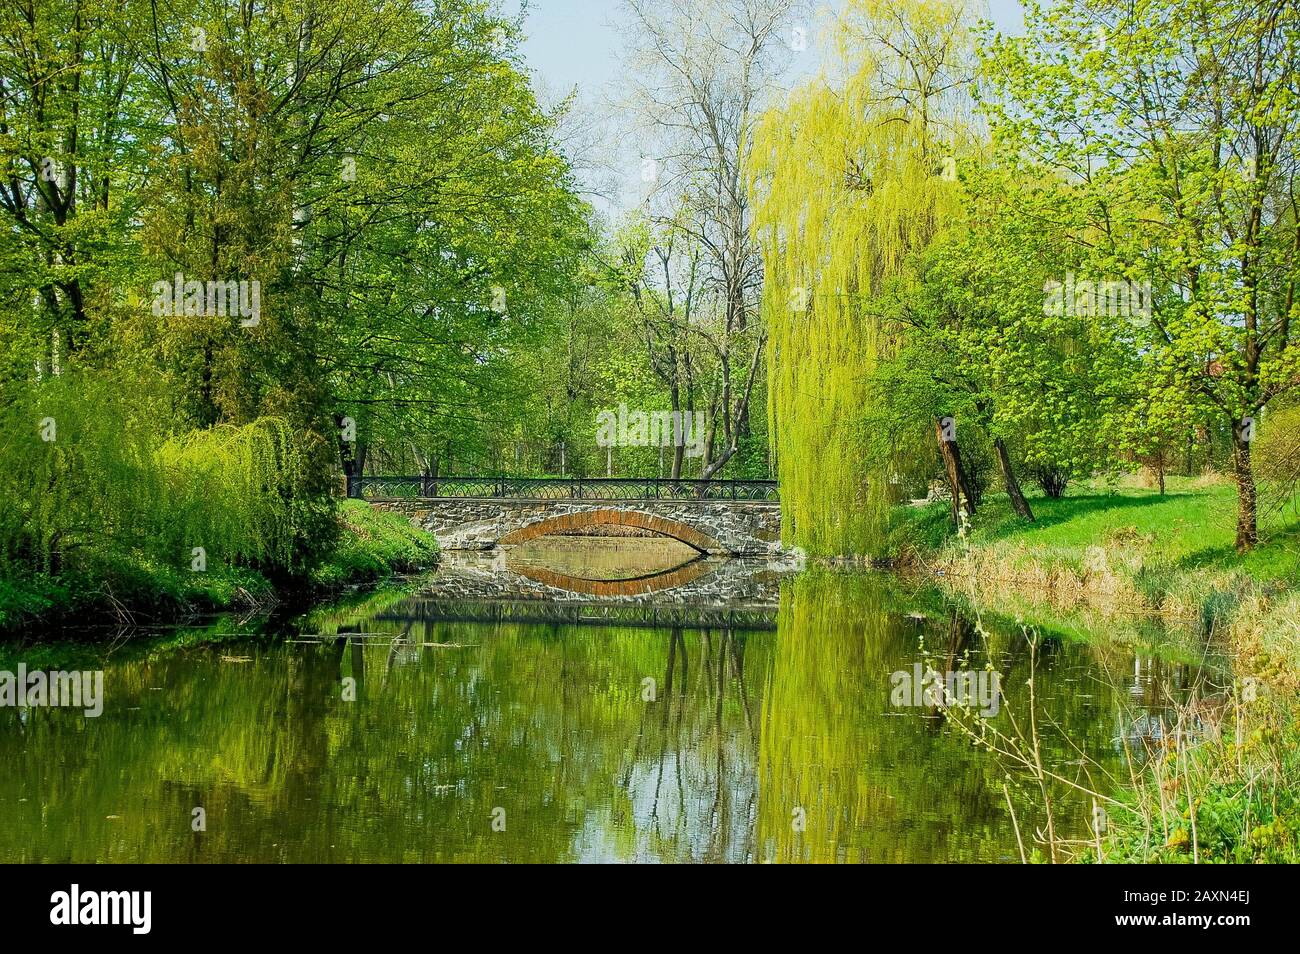 low stone bridge over a pond of water among the trees with bright green leaves in spring park Stock Photo